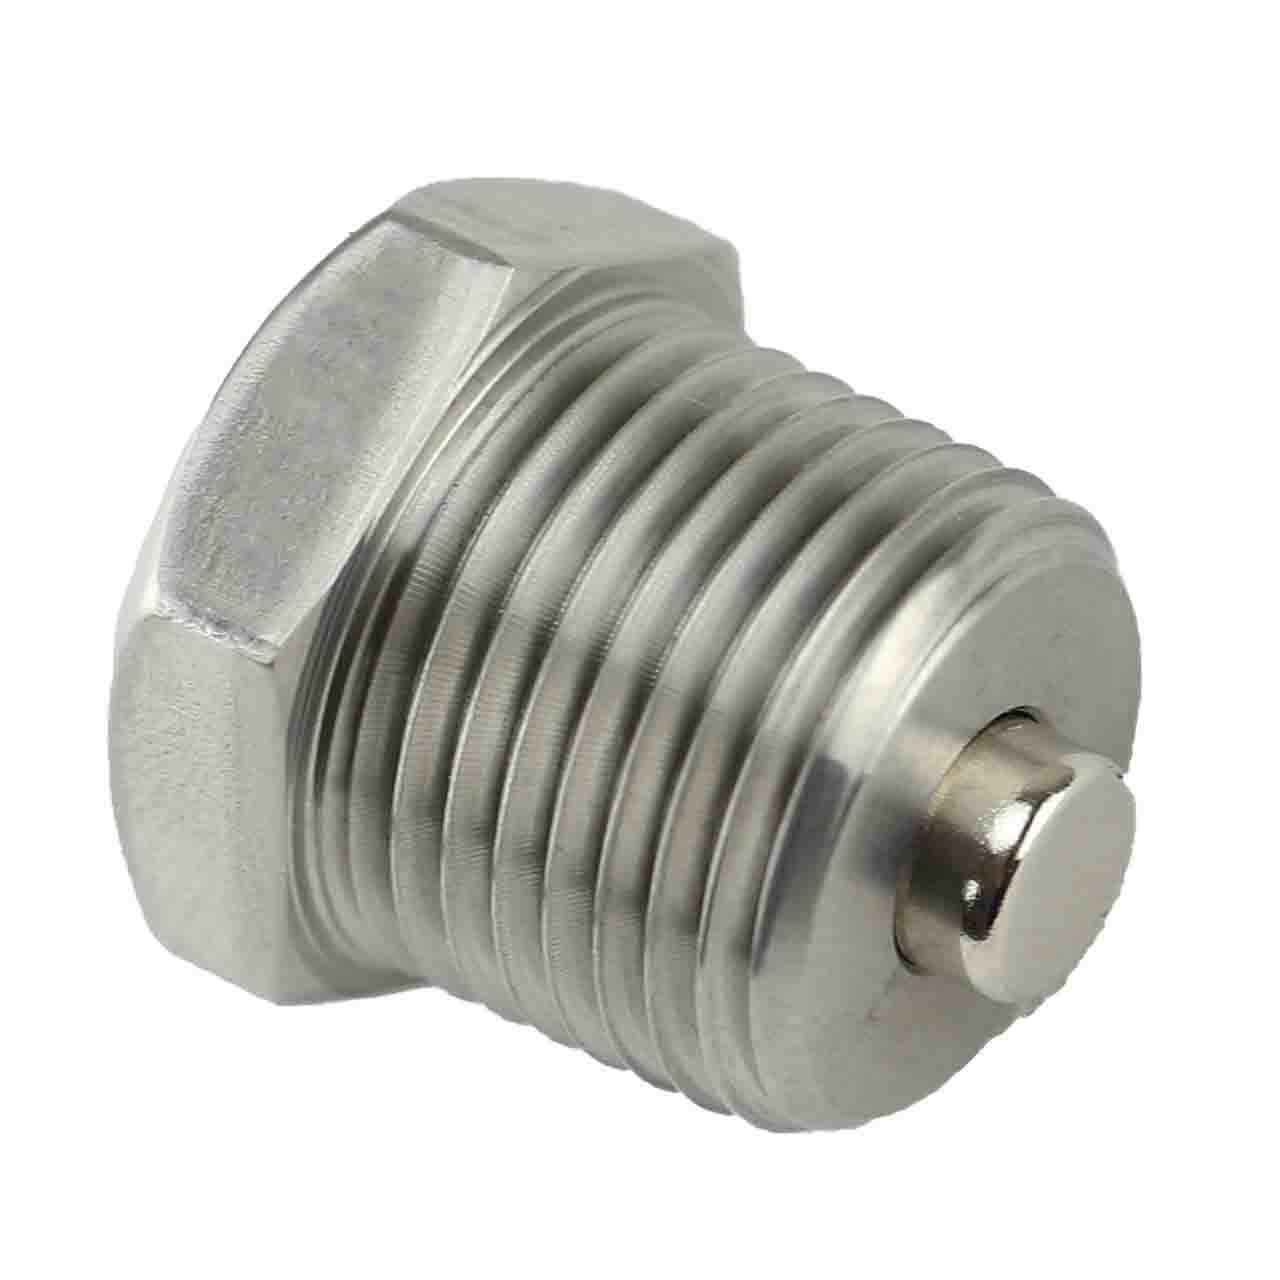 22G2115 for MG - Stainless Steel Magnetic Oil Drain Plug with Neodymium Magnet - Made In USA